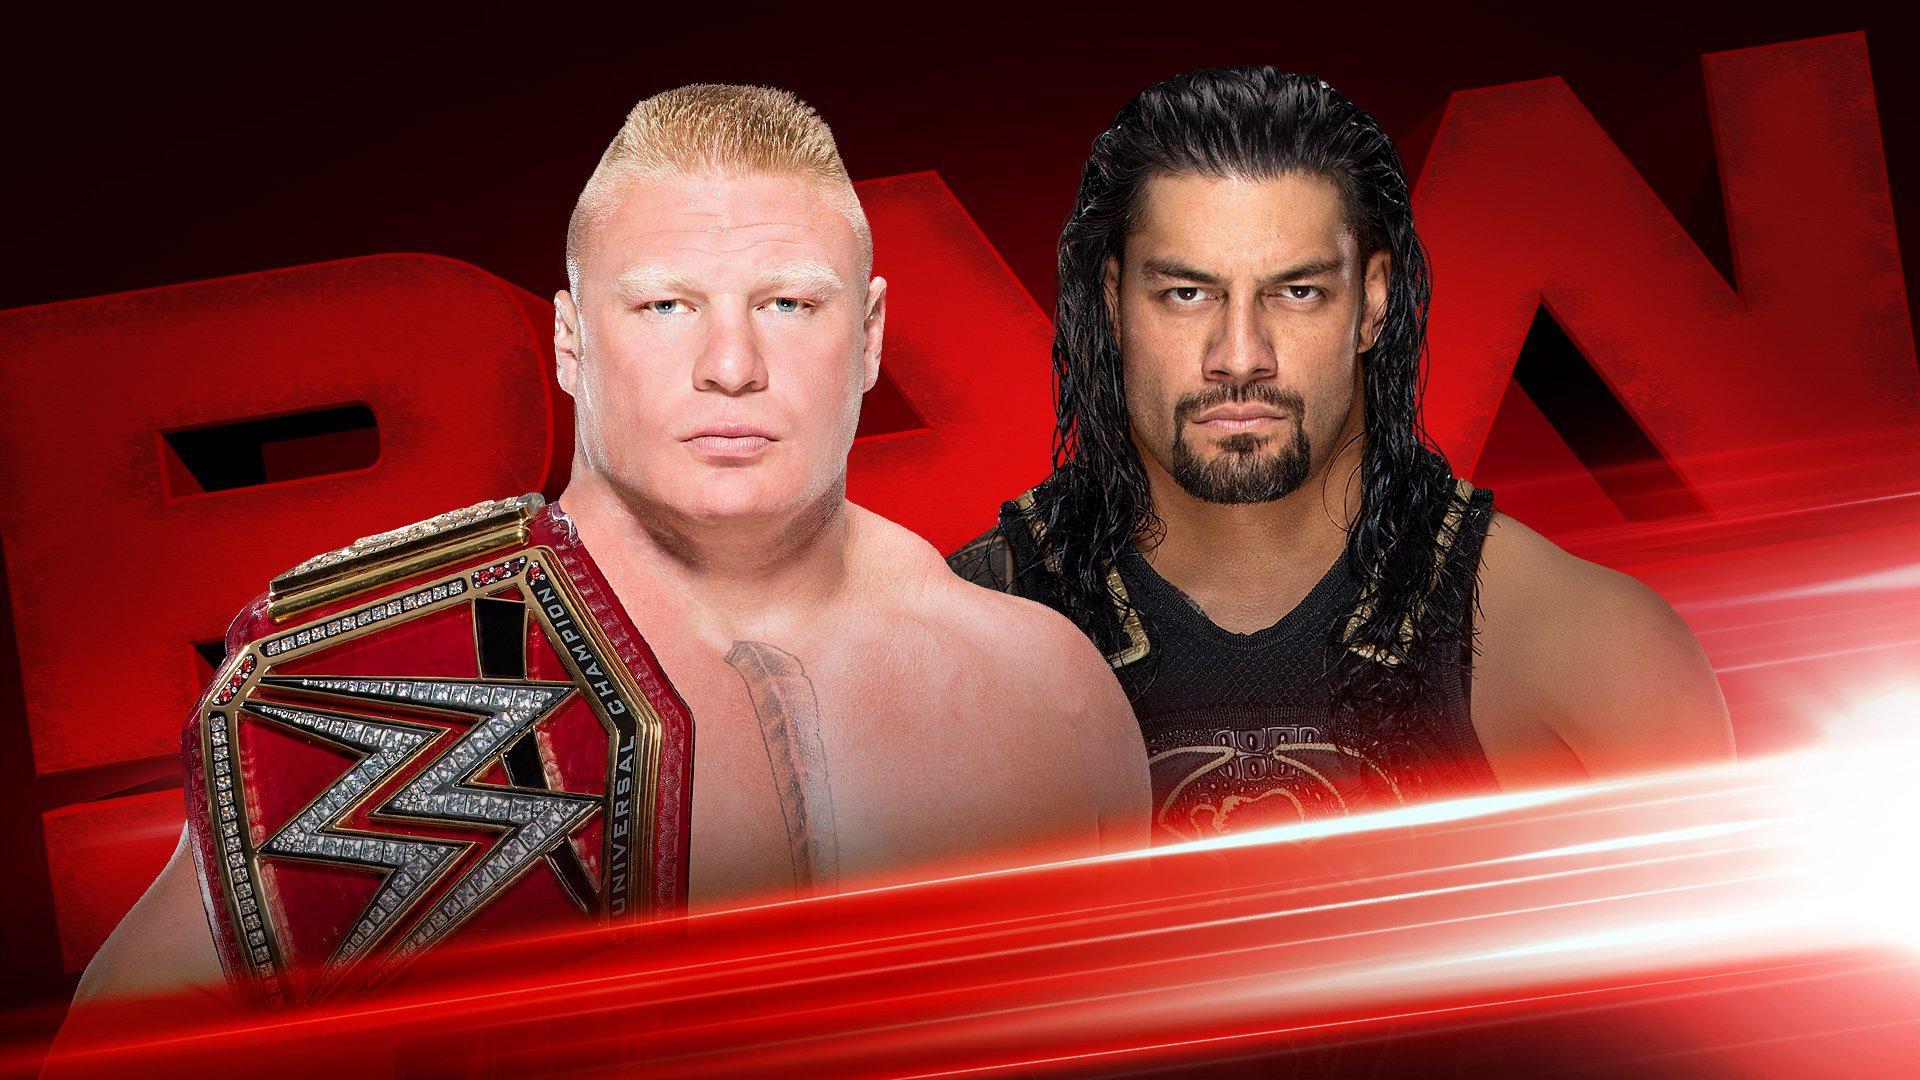 What You Can Expect To See On Tonight's Episode Of WWE Monday Night RAW